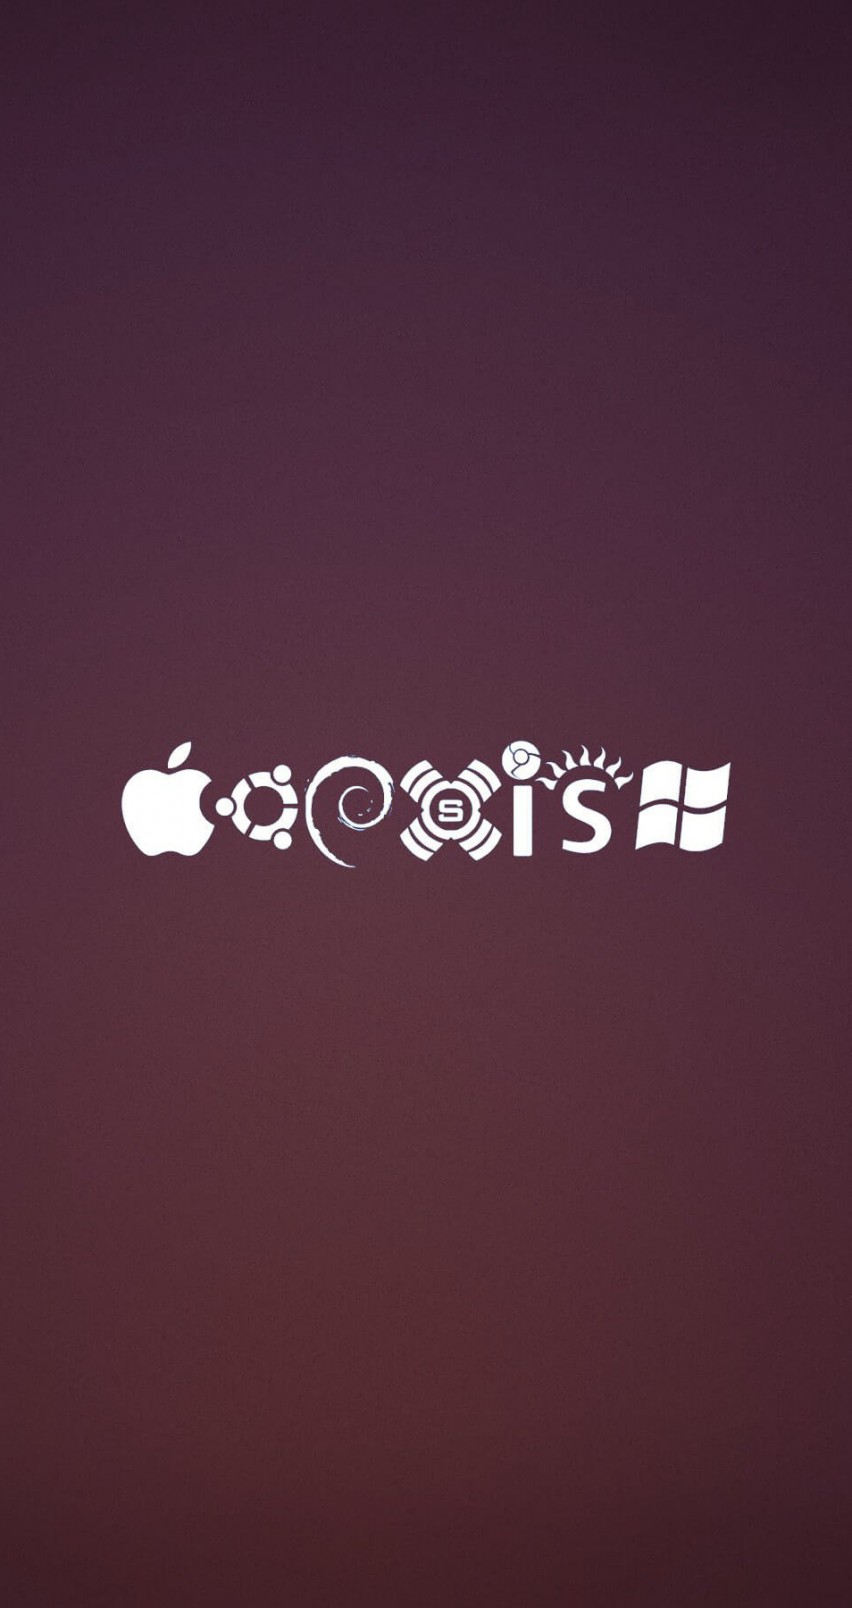 OS Coexist Wallpaper for Apple iPhone 6 / 6s